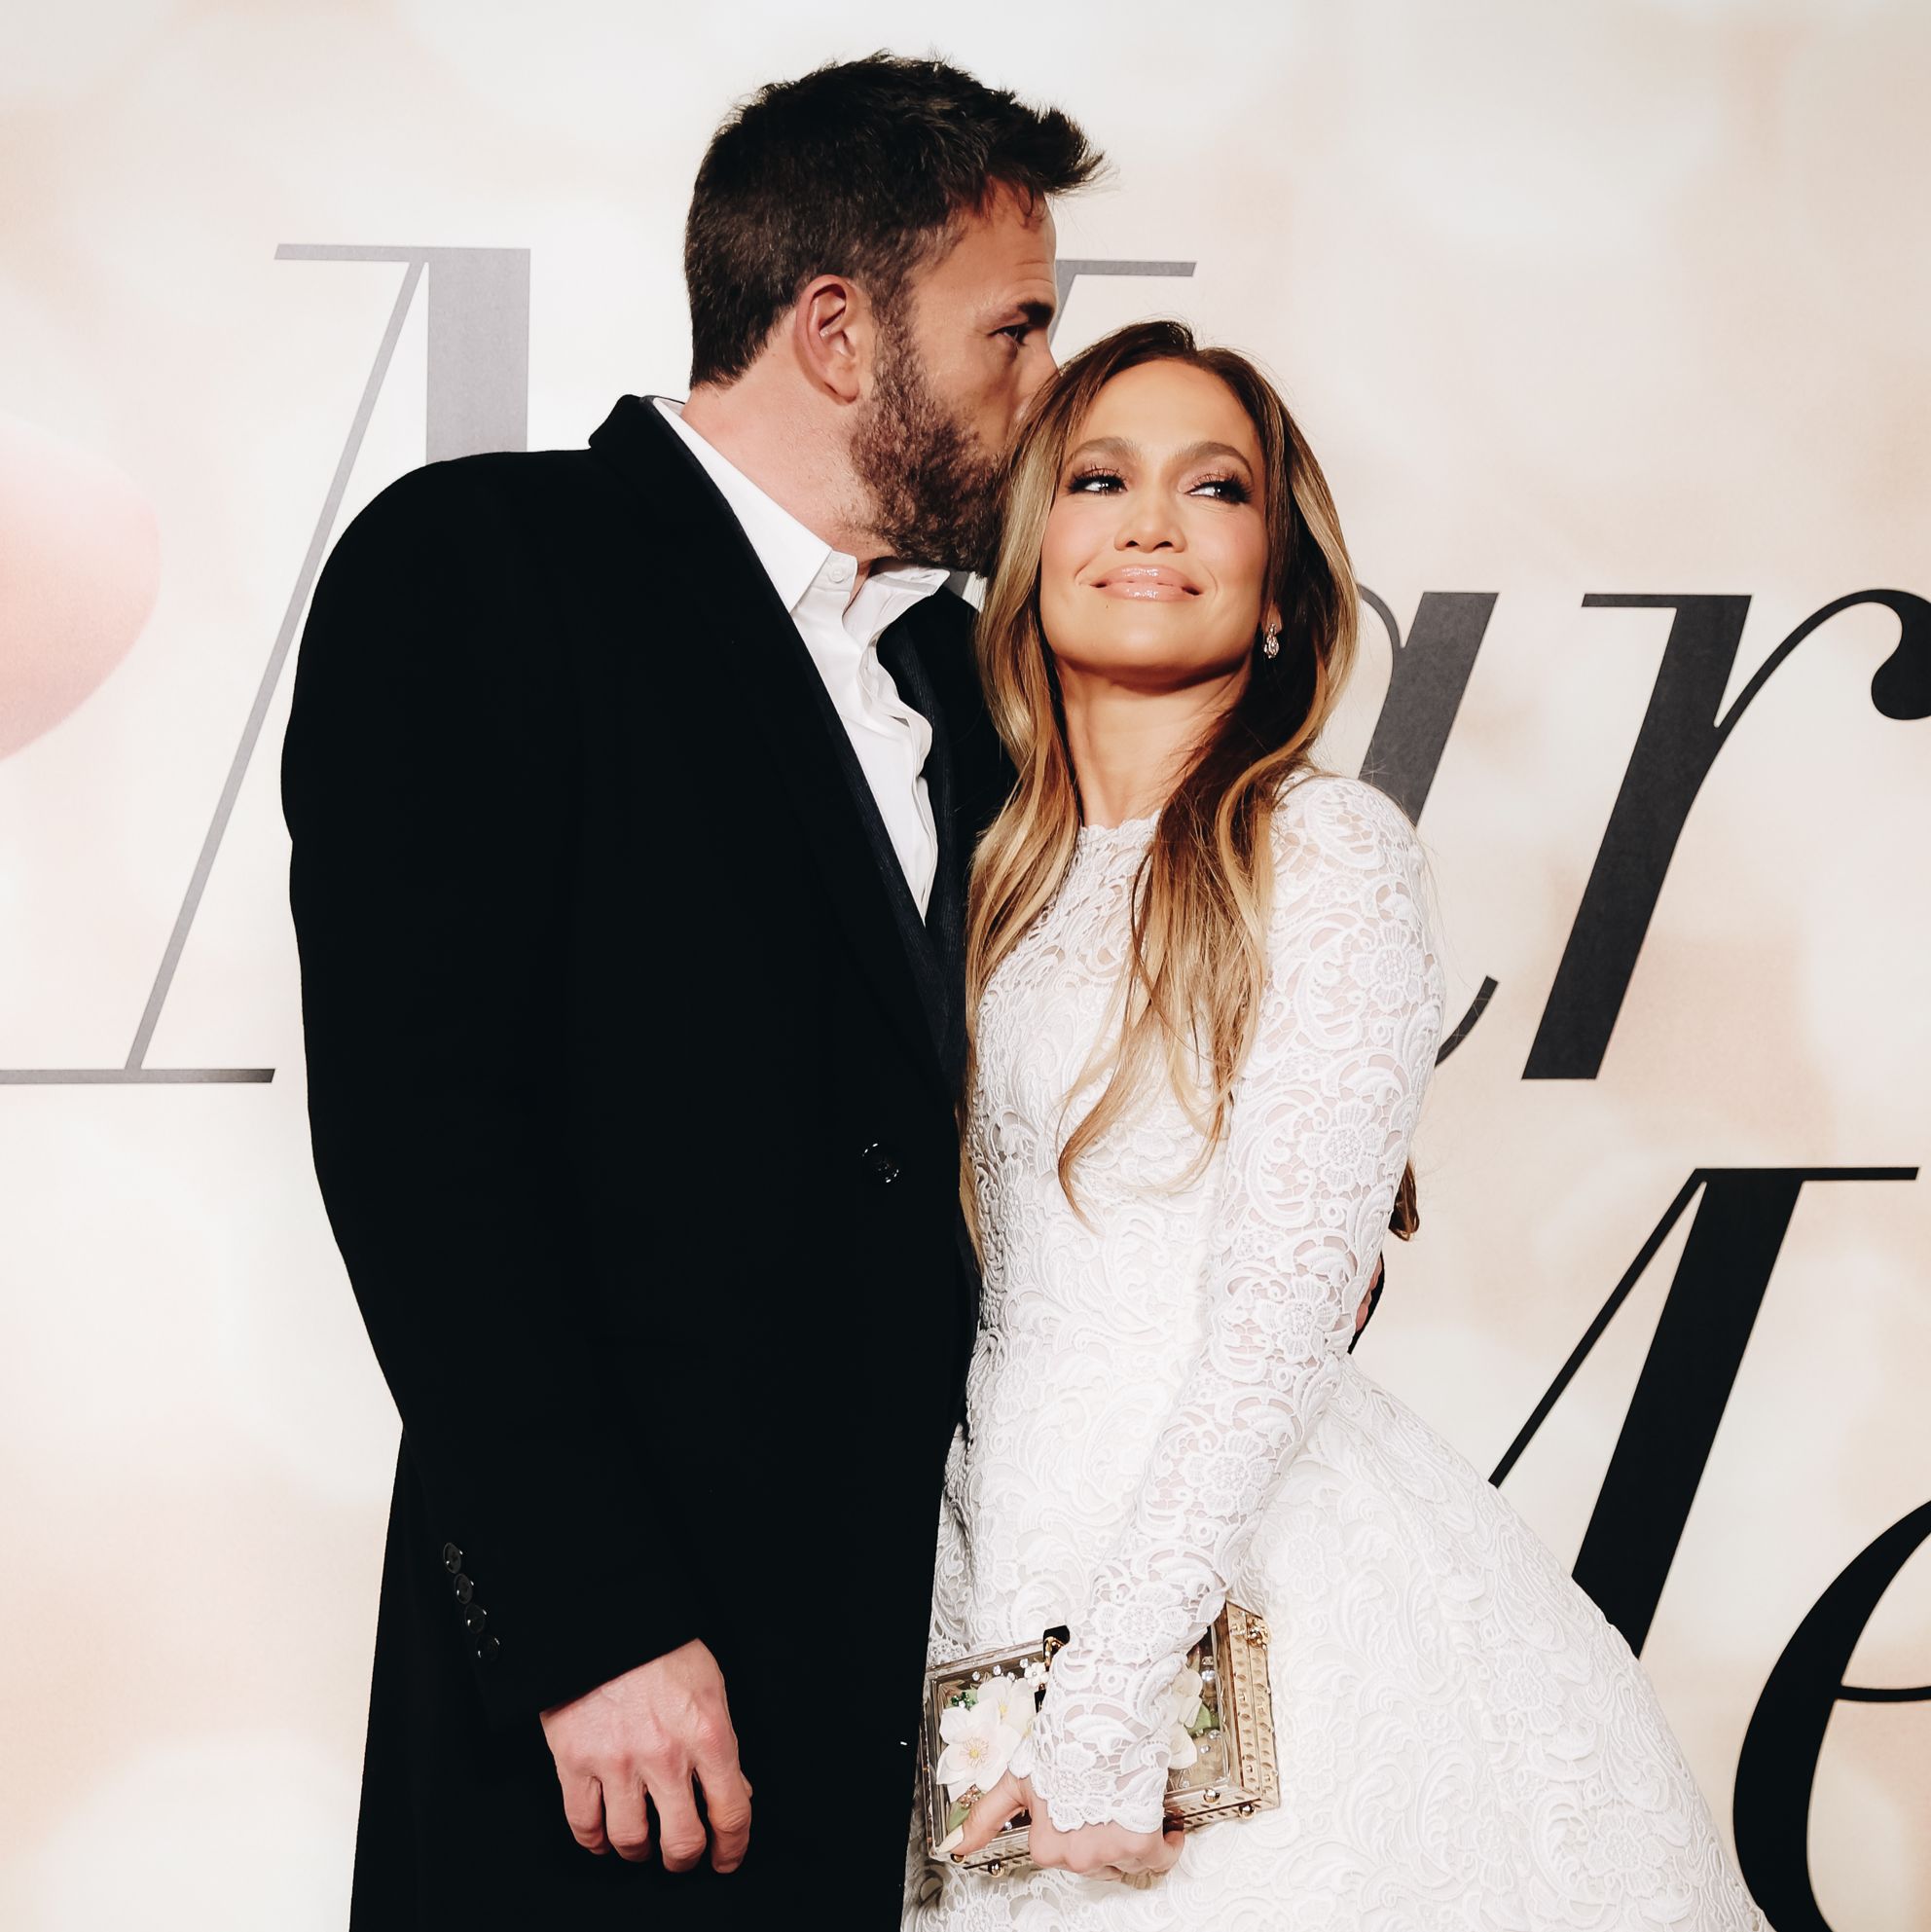 Jennifer Lopez Wore Over $2 Million Worth of Jewelry During Her Second Wedding to Ben Affleck